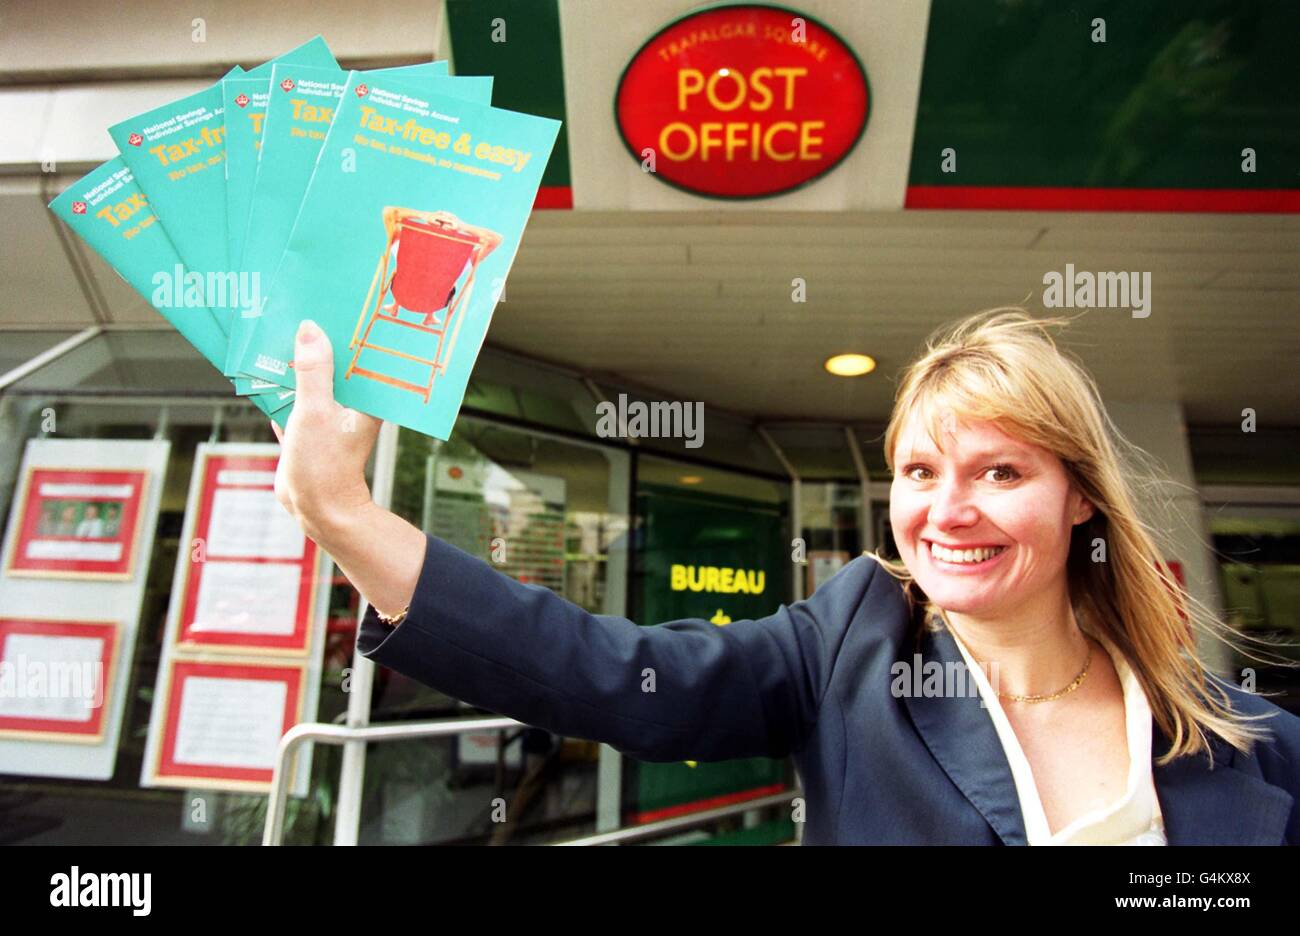 Gill Cattanach, Head of Commercial Development for National Savings, at the Trafalgar Square Post Office in London showing off the brochure for the new National Savings cash mini ISA. * National Savings announced that it is to offer its cash mini ISA over the counter at over 19,000 post offices nationwide. Stock Photo